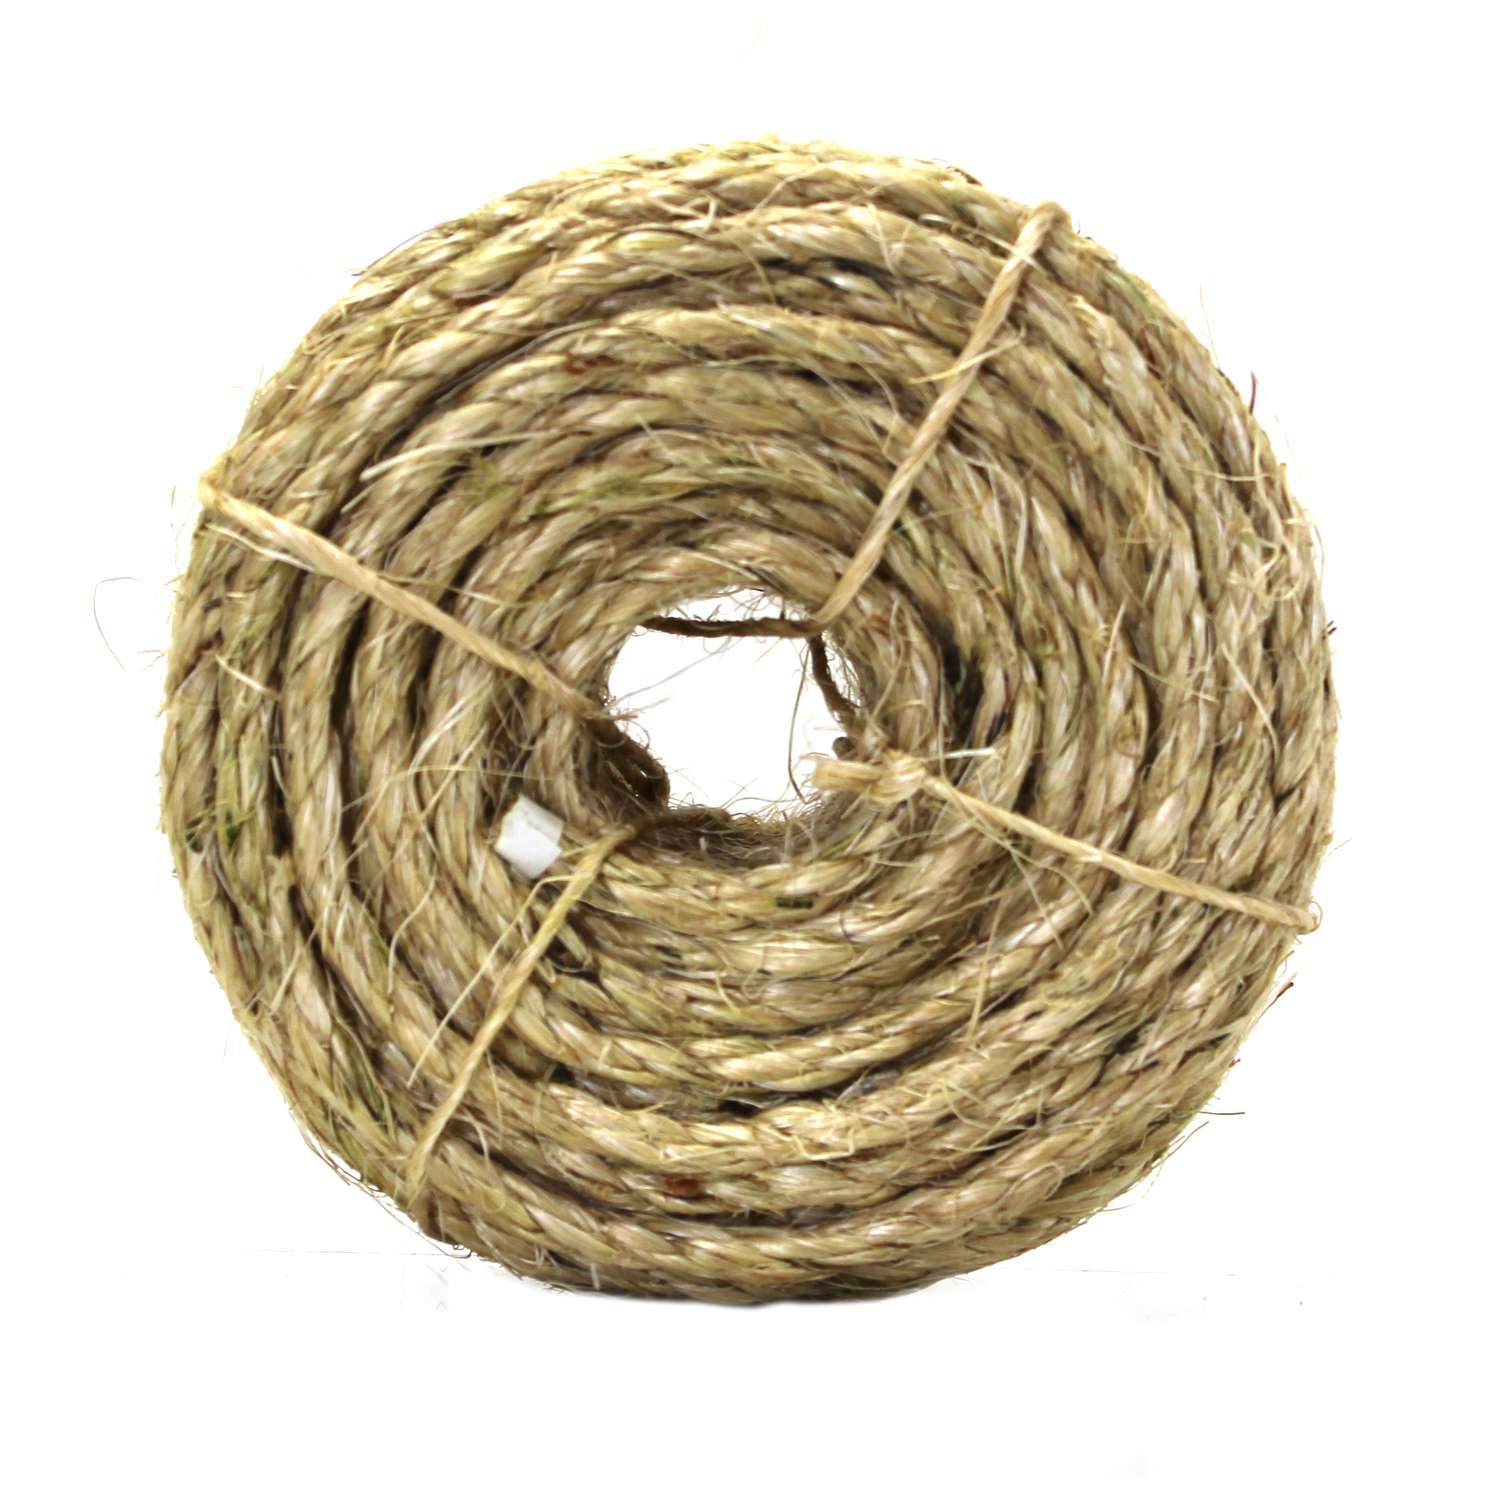 Ace Twisted Sisal Rope, 1/4 x 50